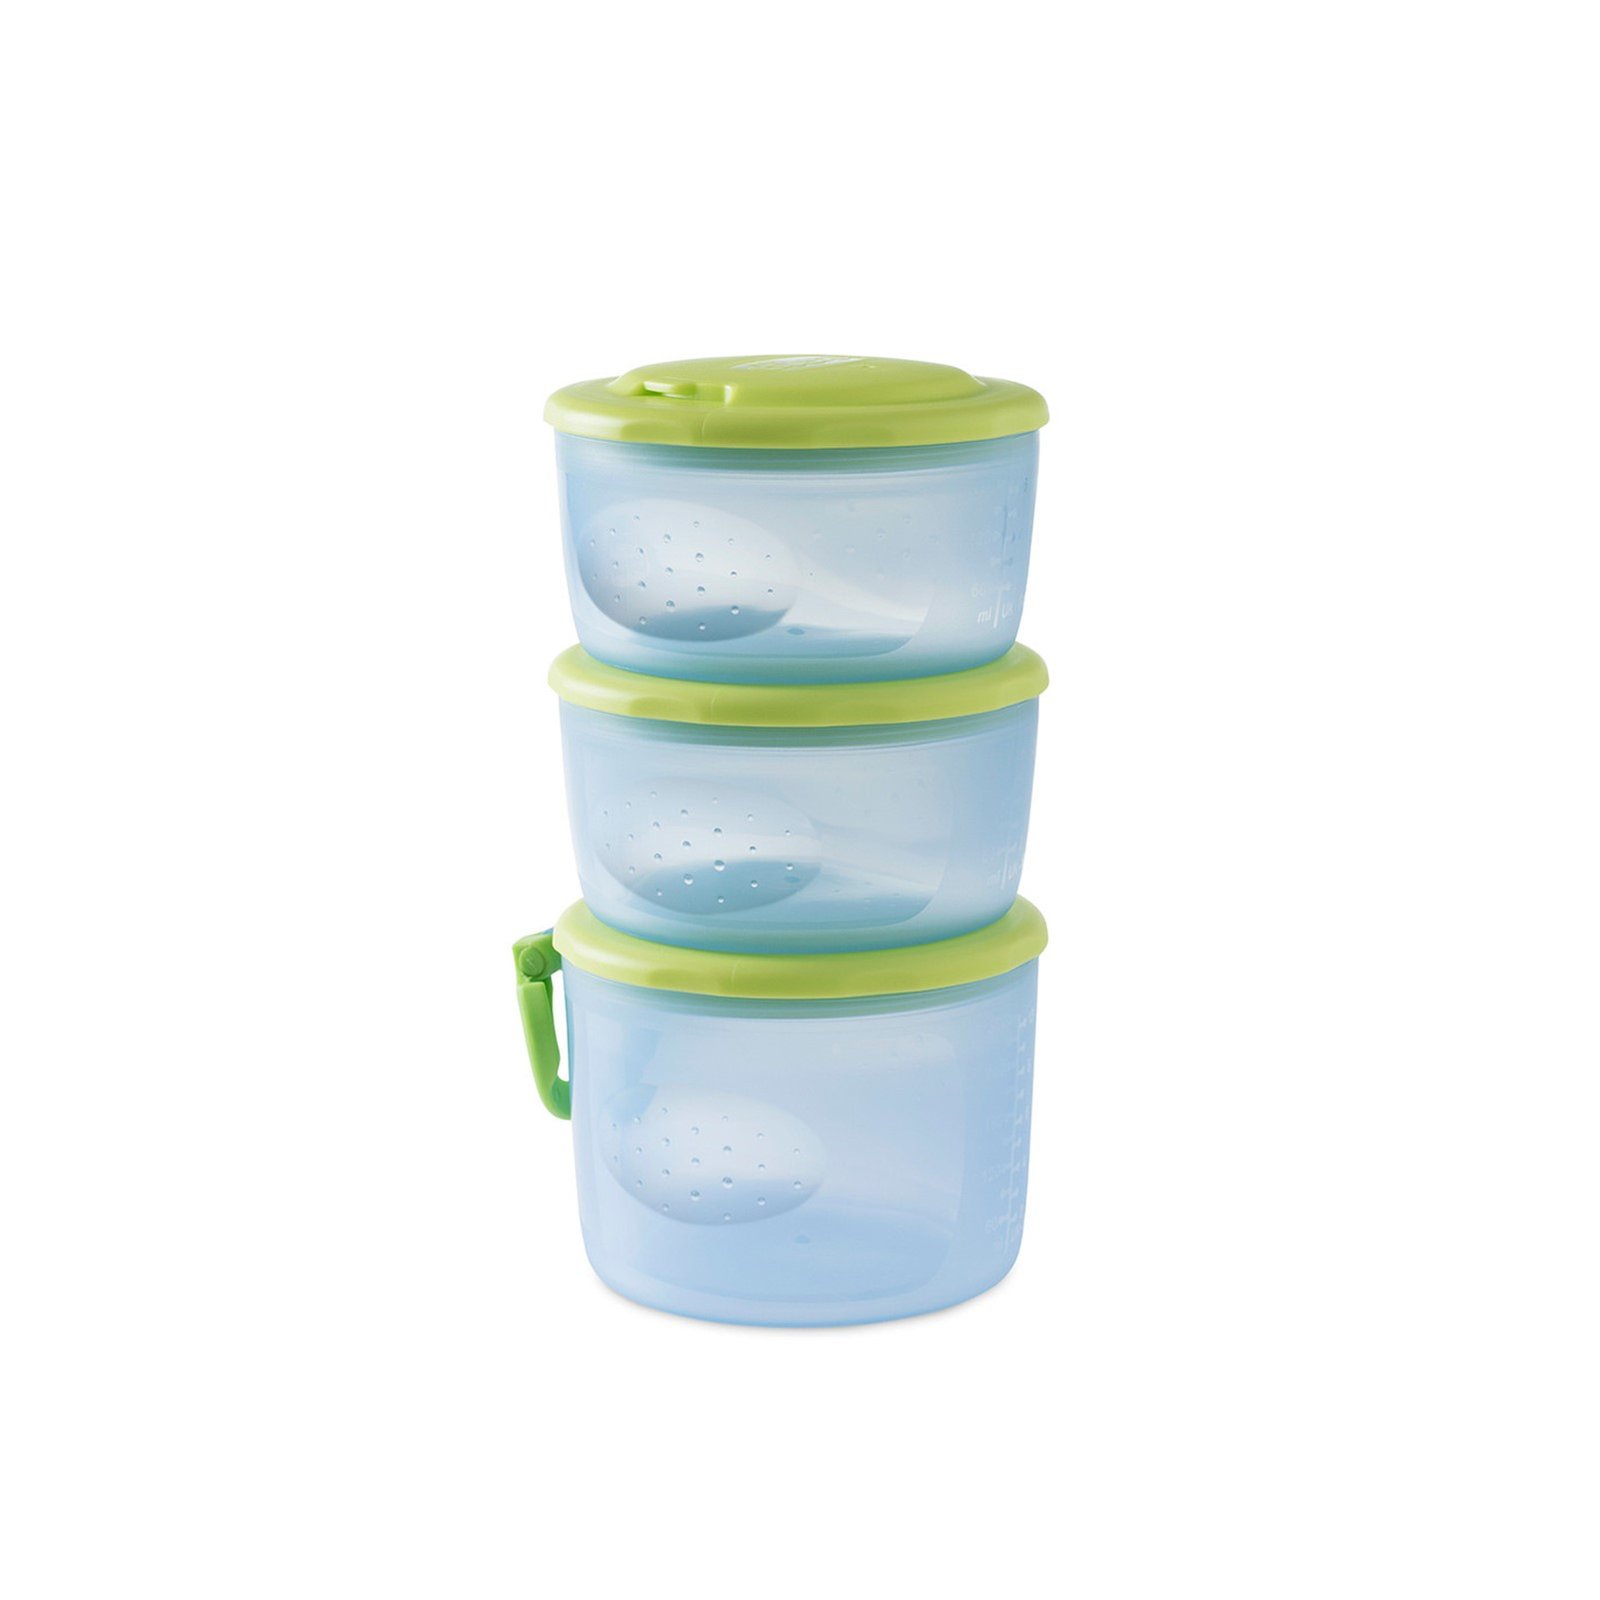 https://static.beautytocare.com/cdn-cgi/image/width=1600,height=1600,f=auto/media/catalog/product//c/h/chicco-system-easy-meal-baby-food-containers-x3.jpg